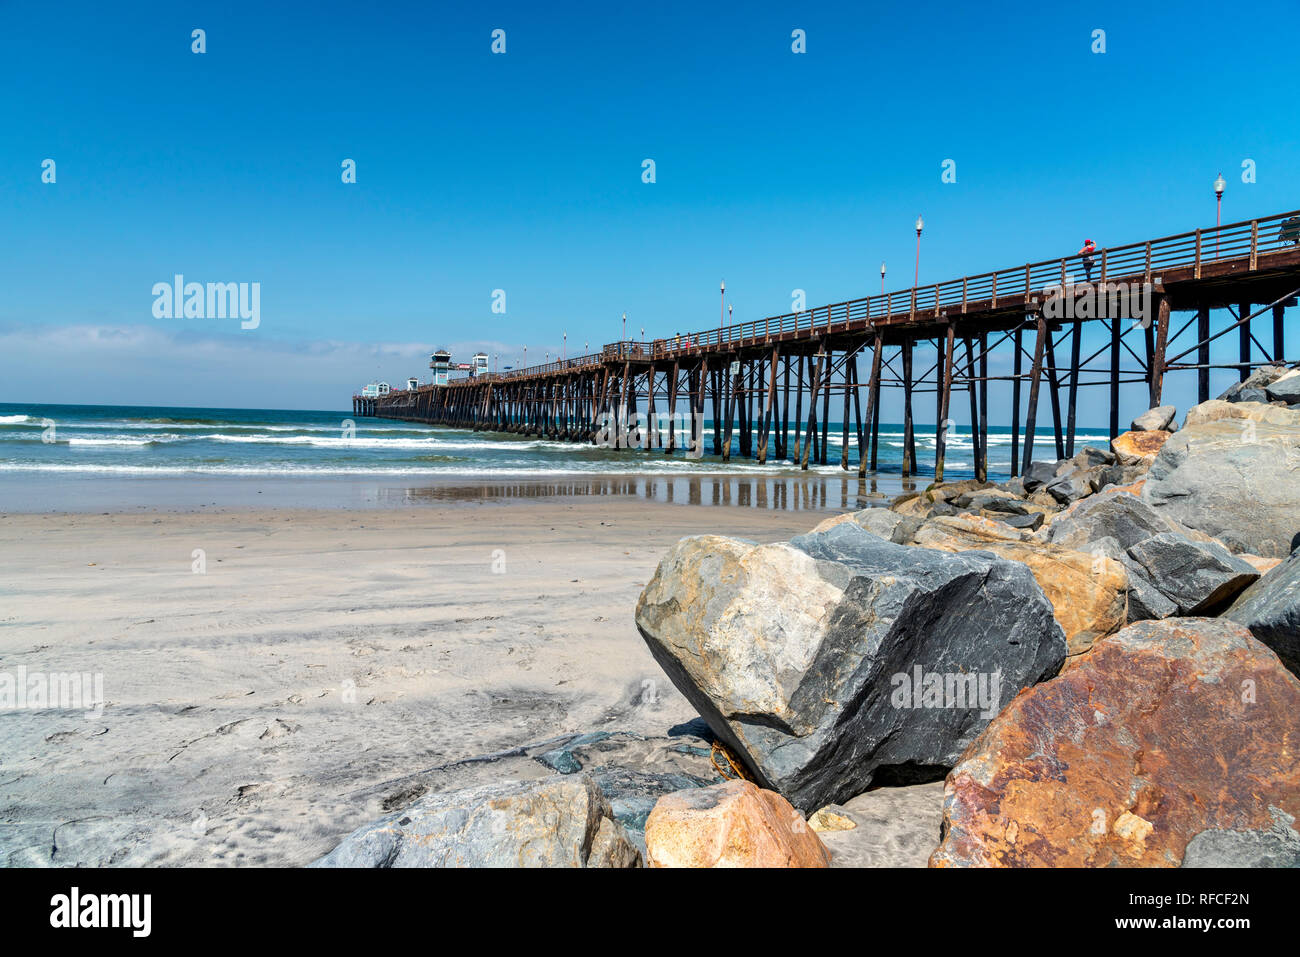 Pier running into sea, large boulders on right with beach and ocean beyond under bright blue sky. Stock Photo